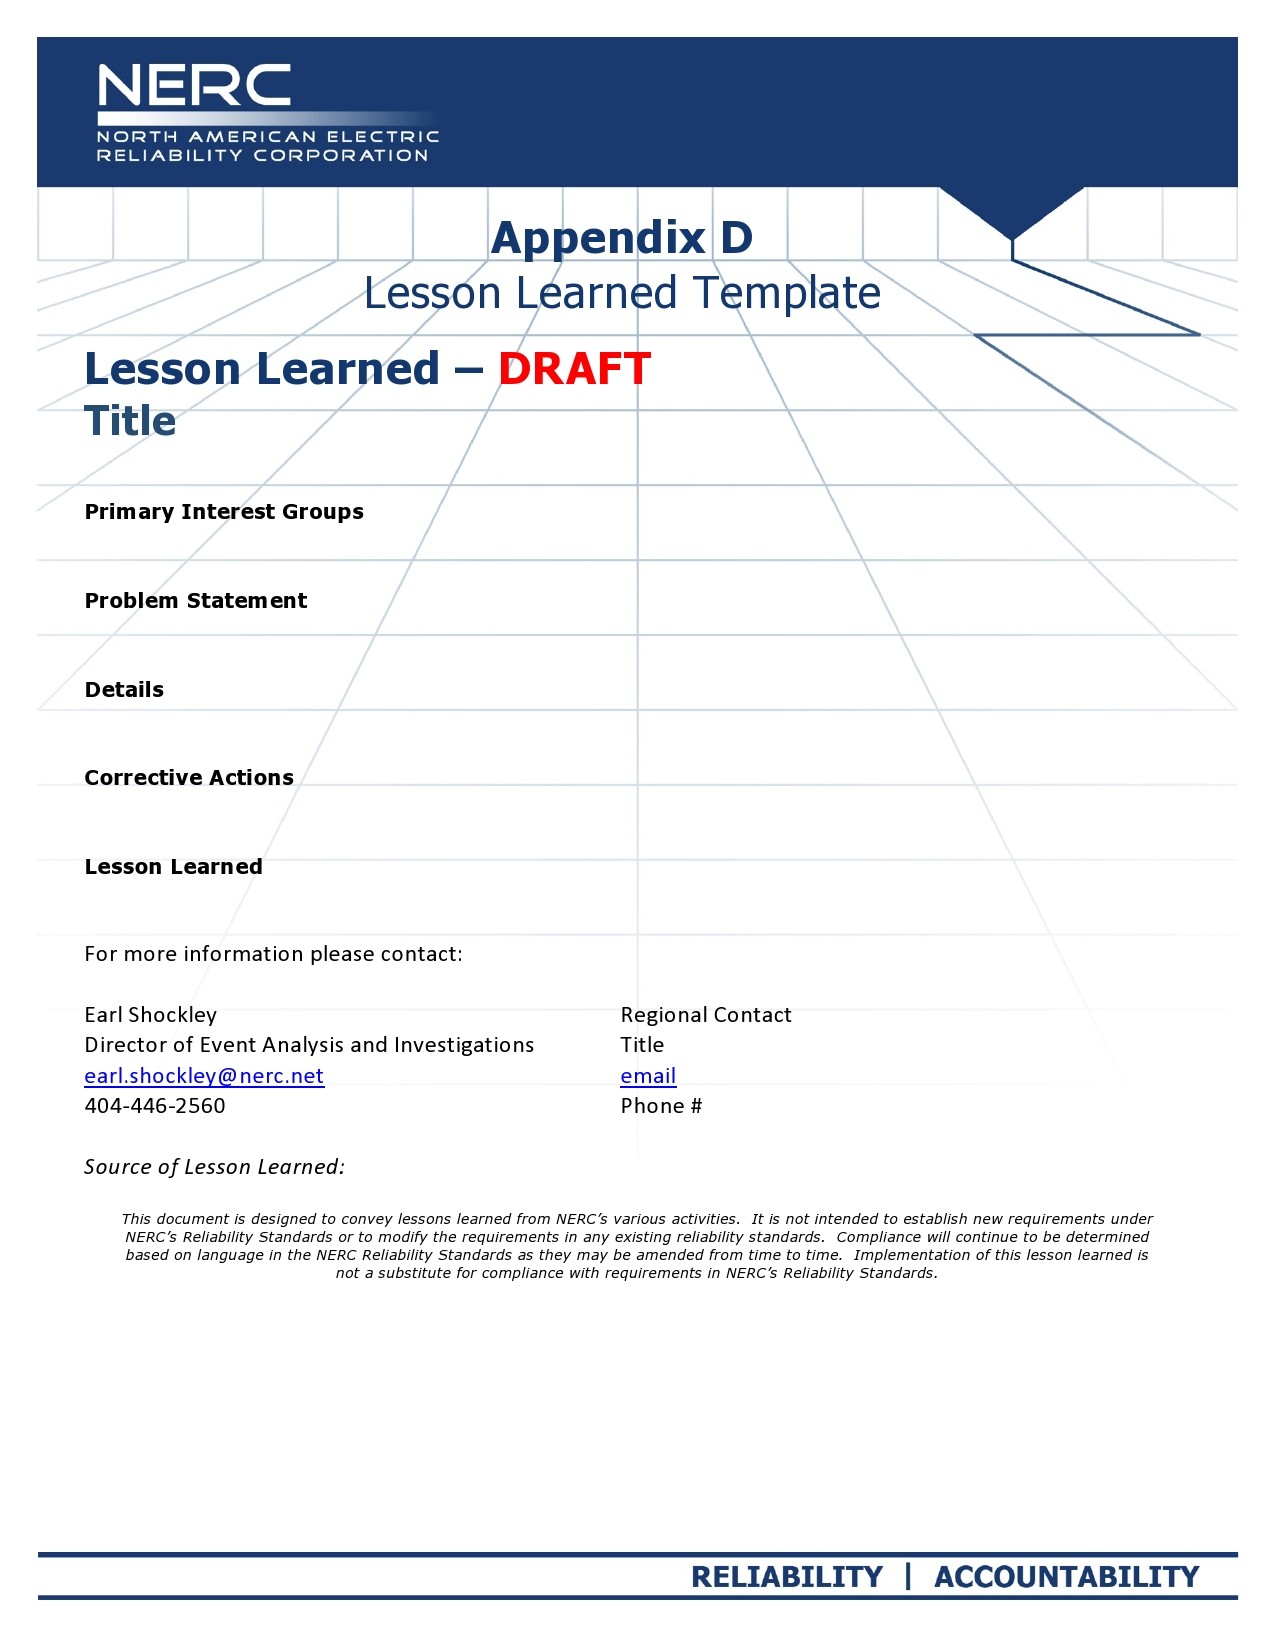 48 Best Lessons Learned Templates Excel Word ᐅ TemplateLab